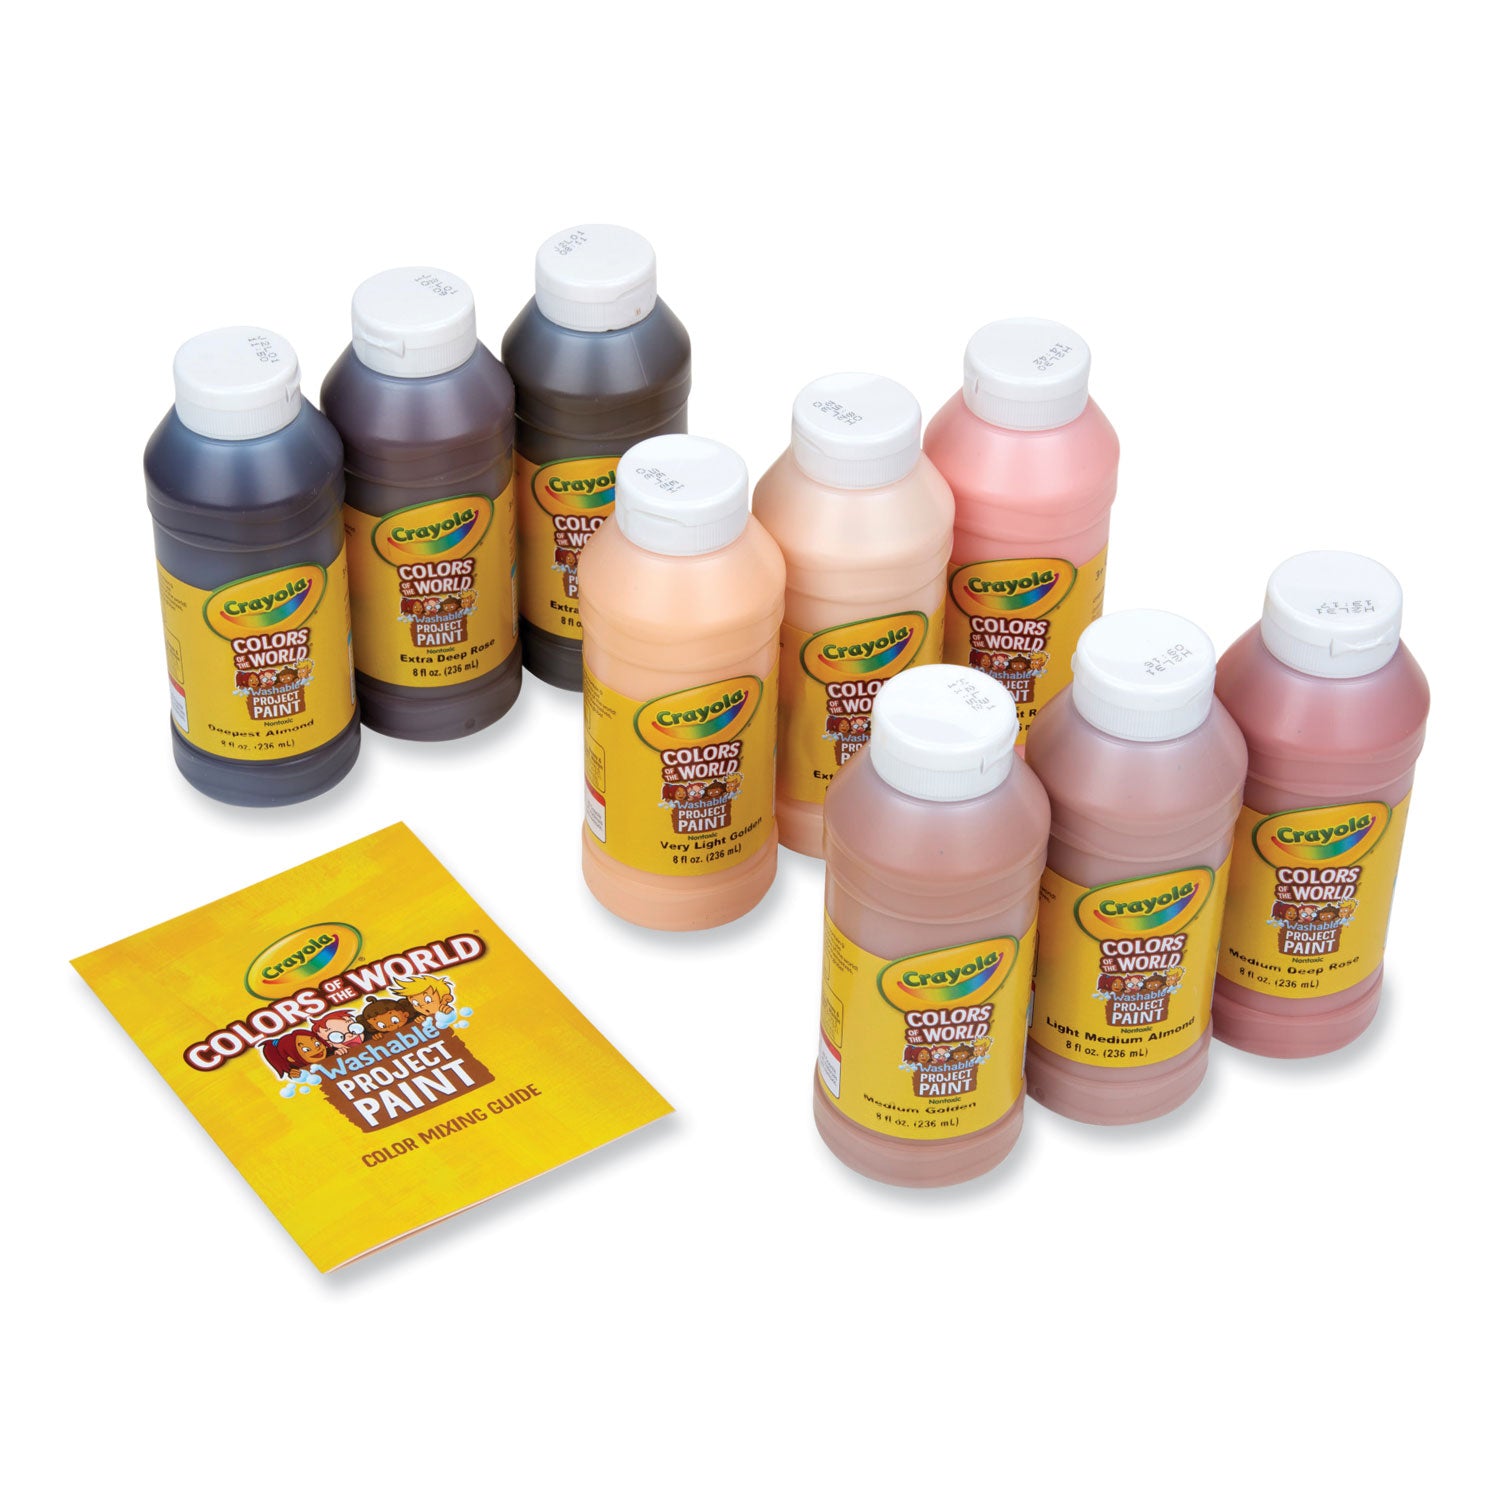 colors-of-the-world-washable-paint-9-assorted-colors-8-oz-bottles-9-pack_cyo542314 - 2